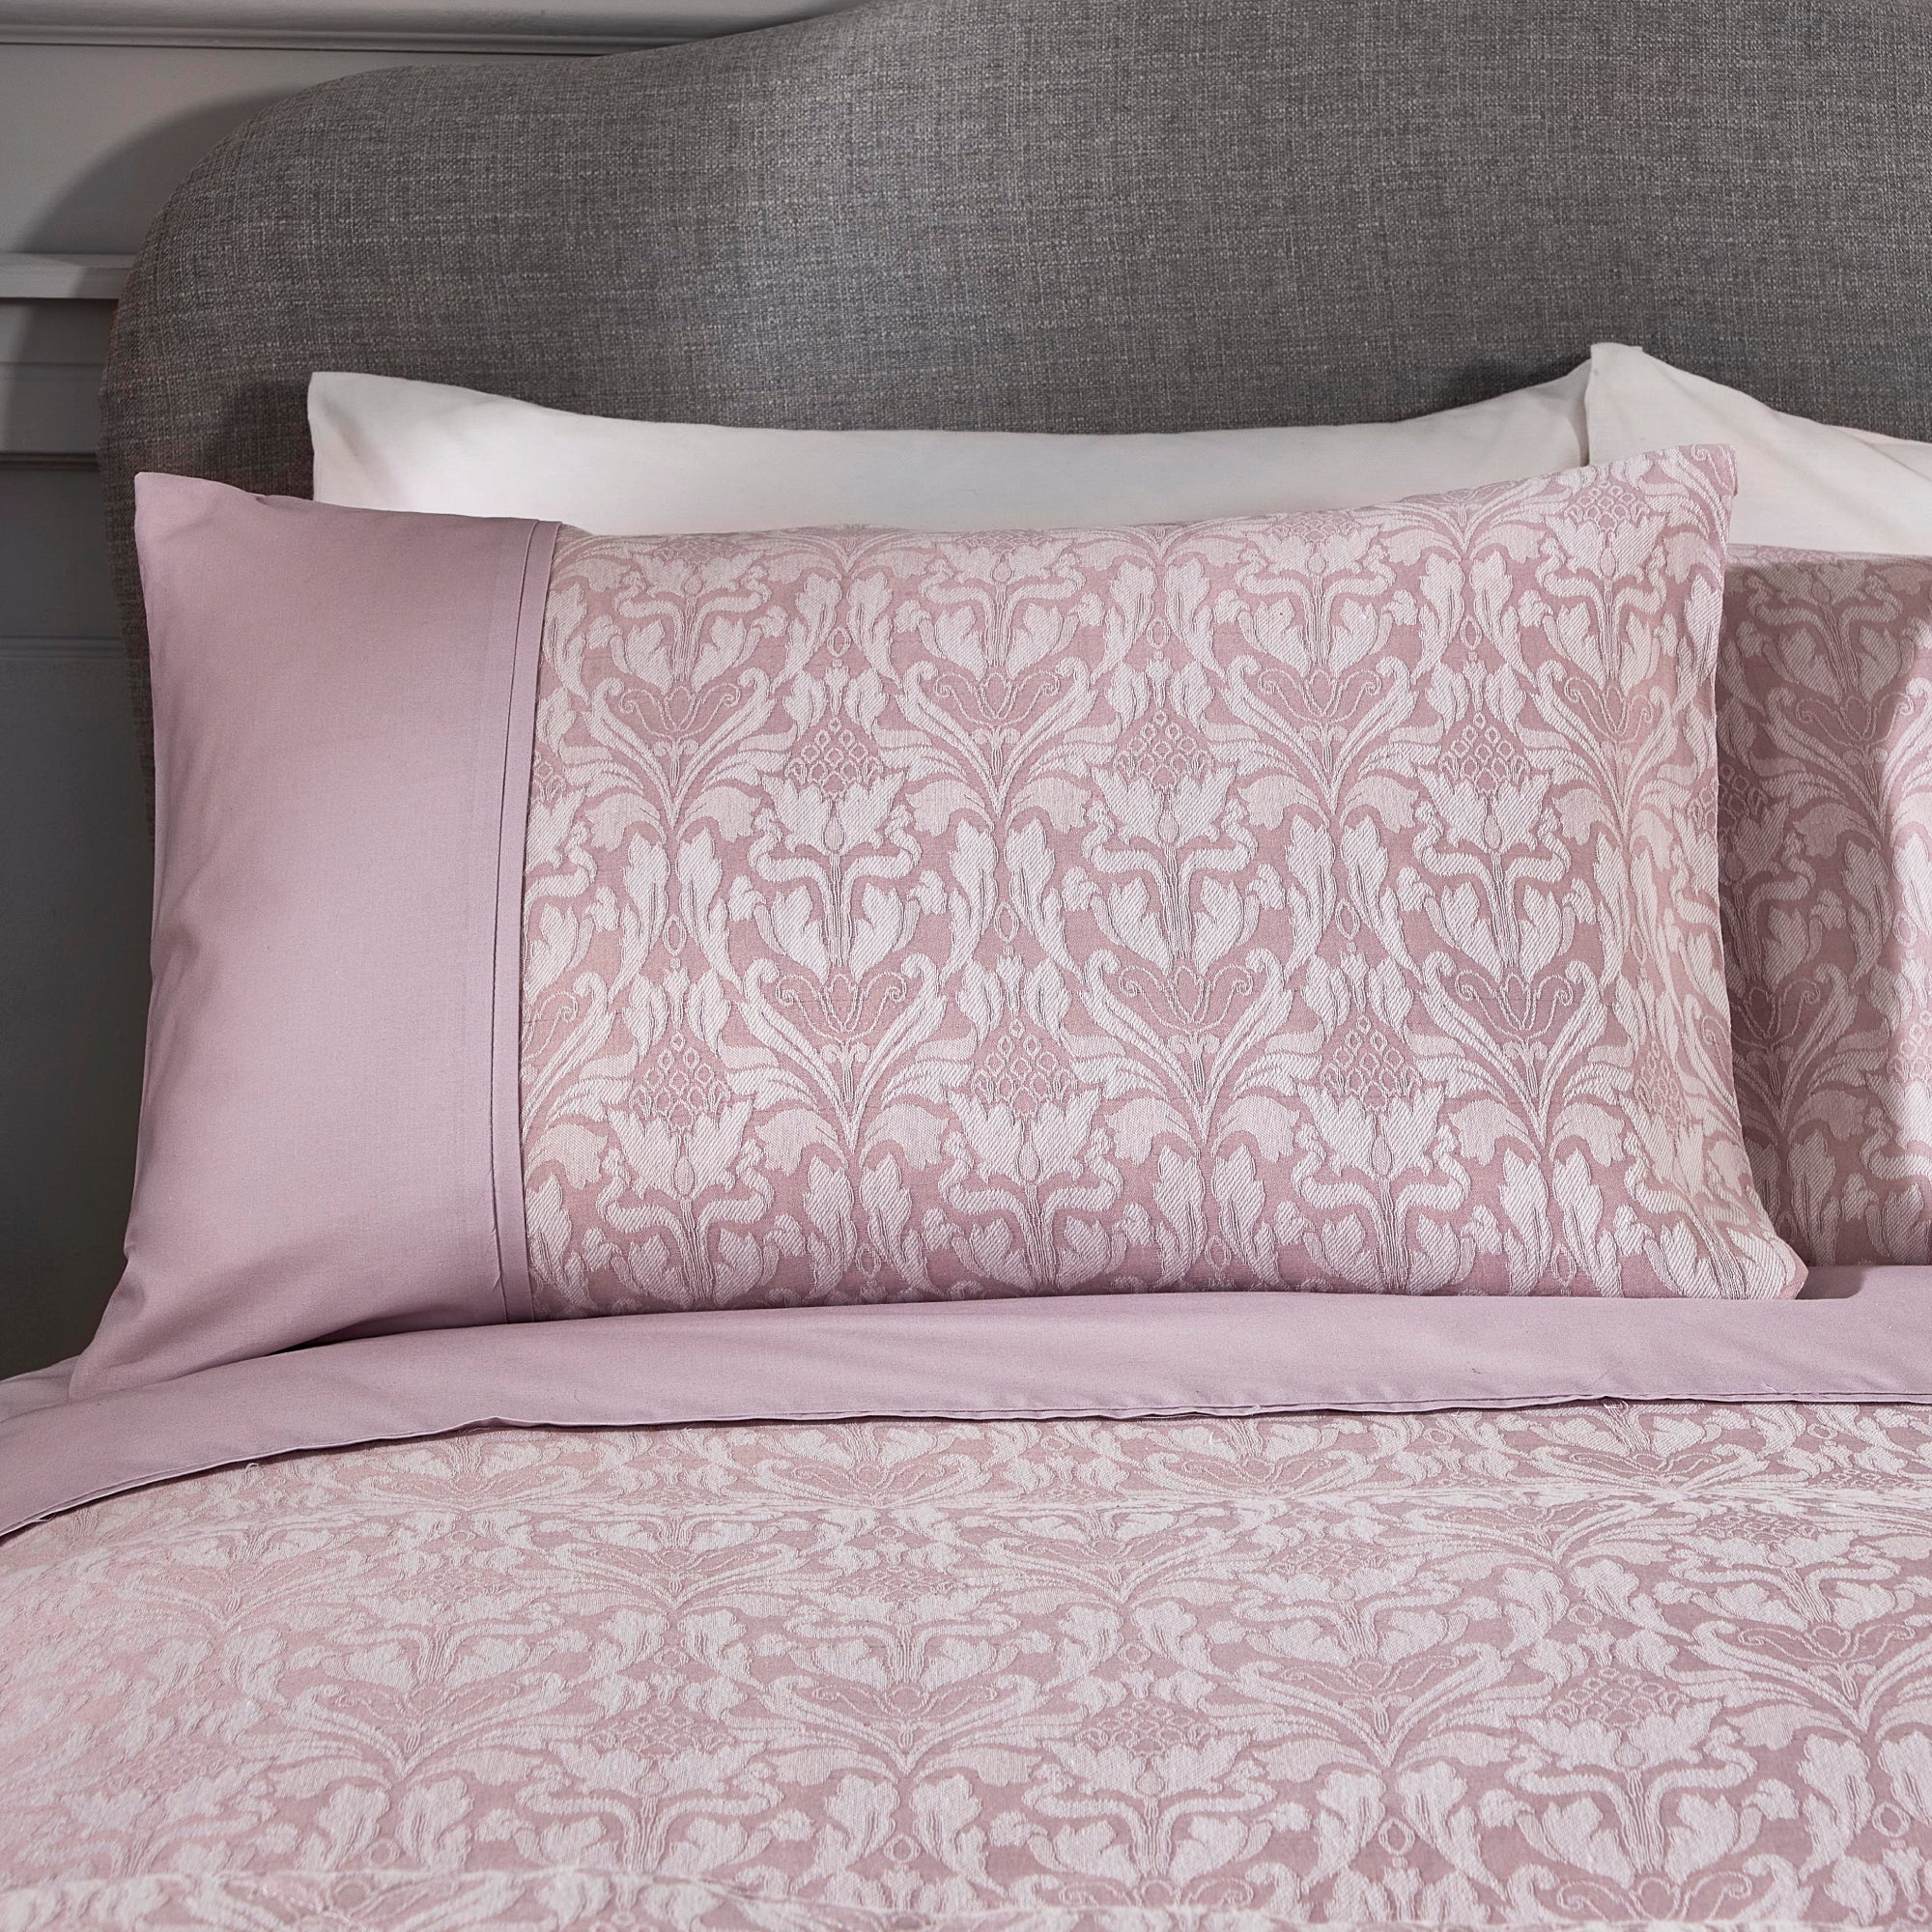 Duvet Cover Set Hawthorne by Dreams & Drapes Woven in Lavender